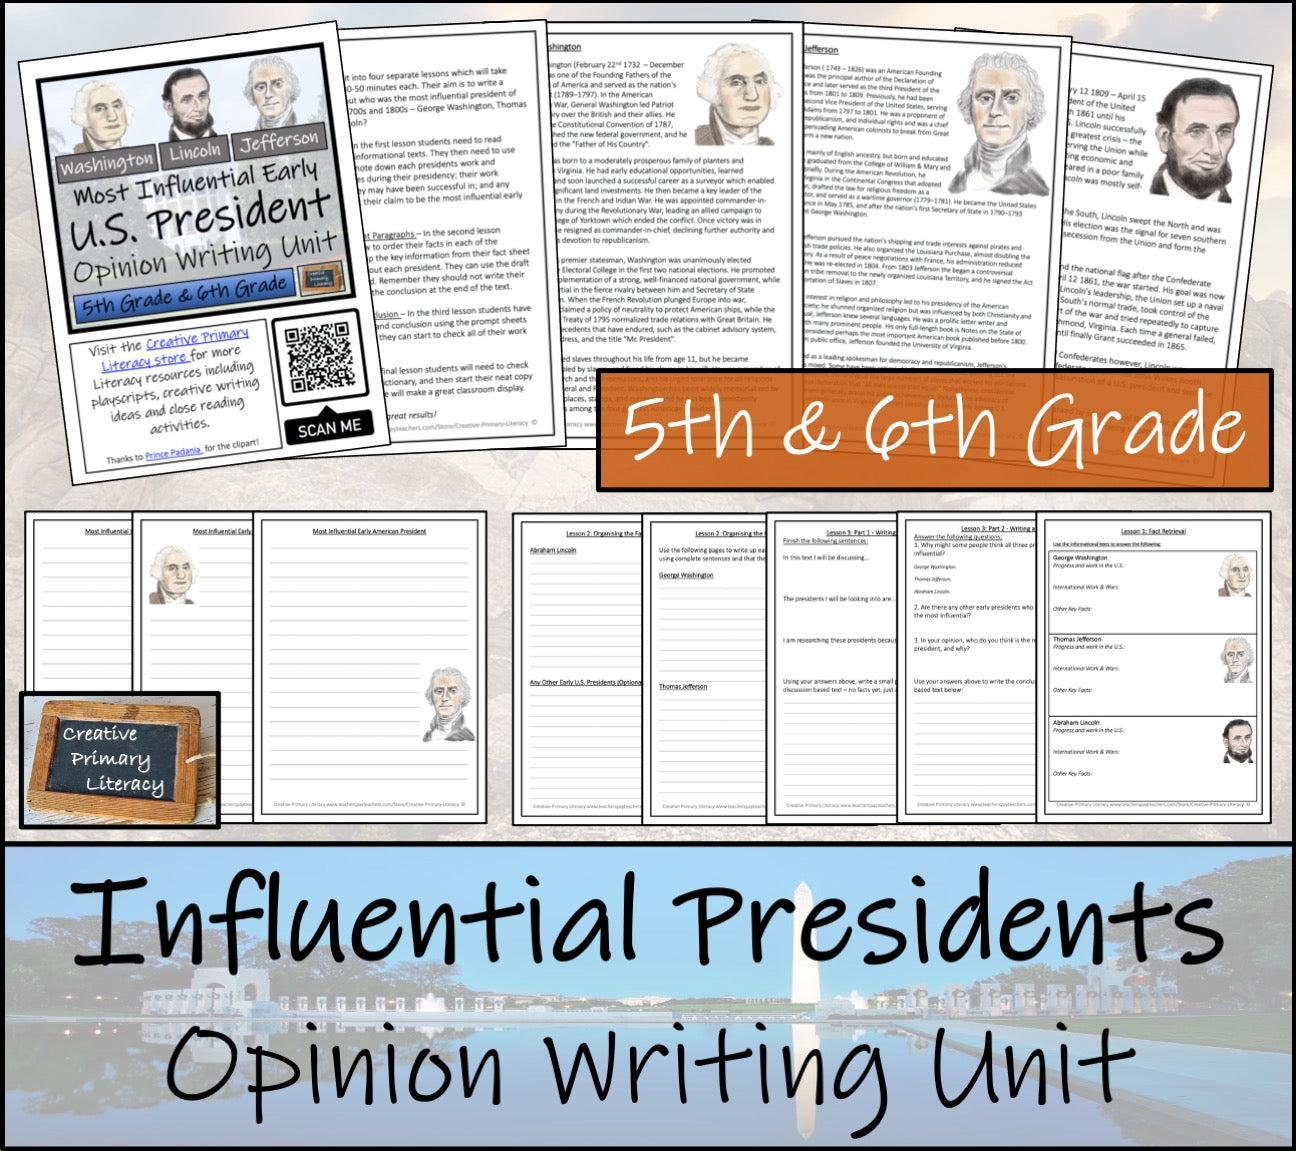 Most Influential Early President Opinion Writing Unit | 5th Grade & 6th Grade